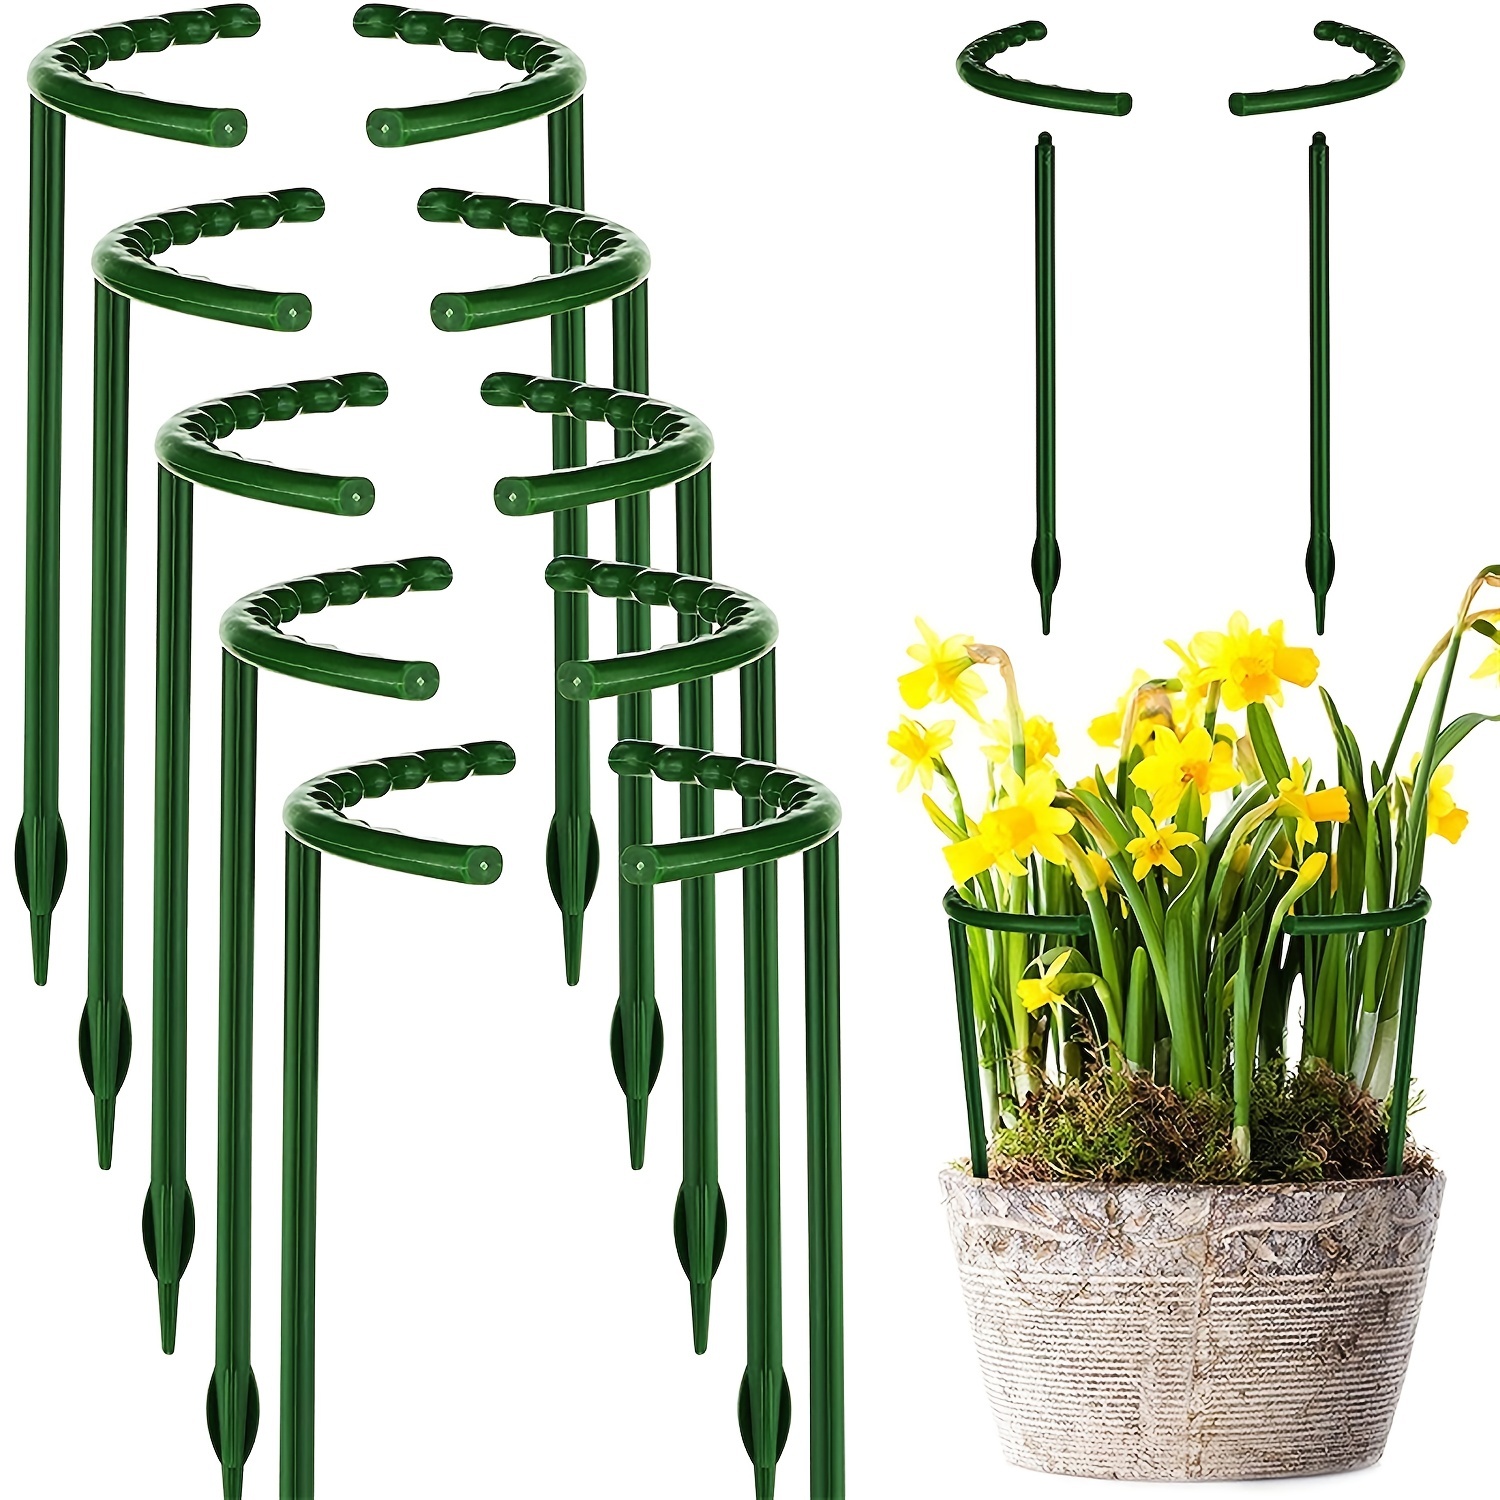 

4pcs/12pcs, Plastic Support Pile Stand Plant Support Pile For Flowers Greenhouses Arrangement Fixing Rod Holder Garden Tools